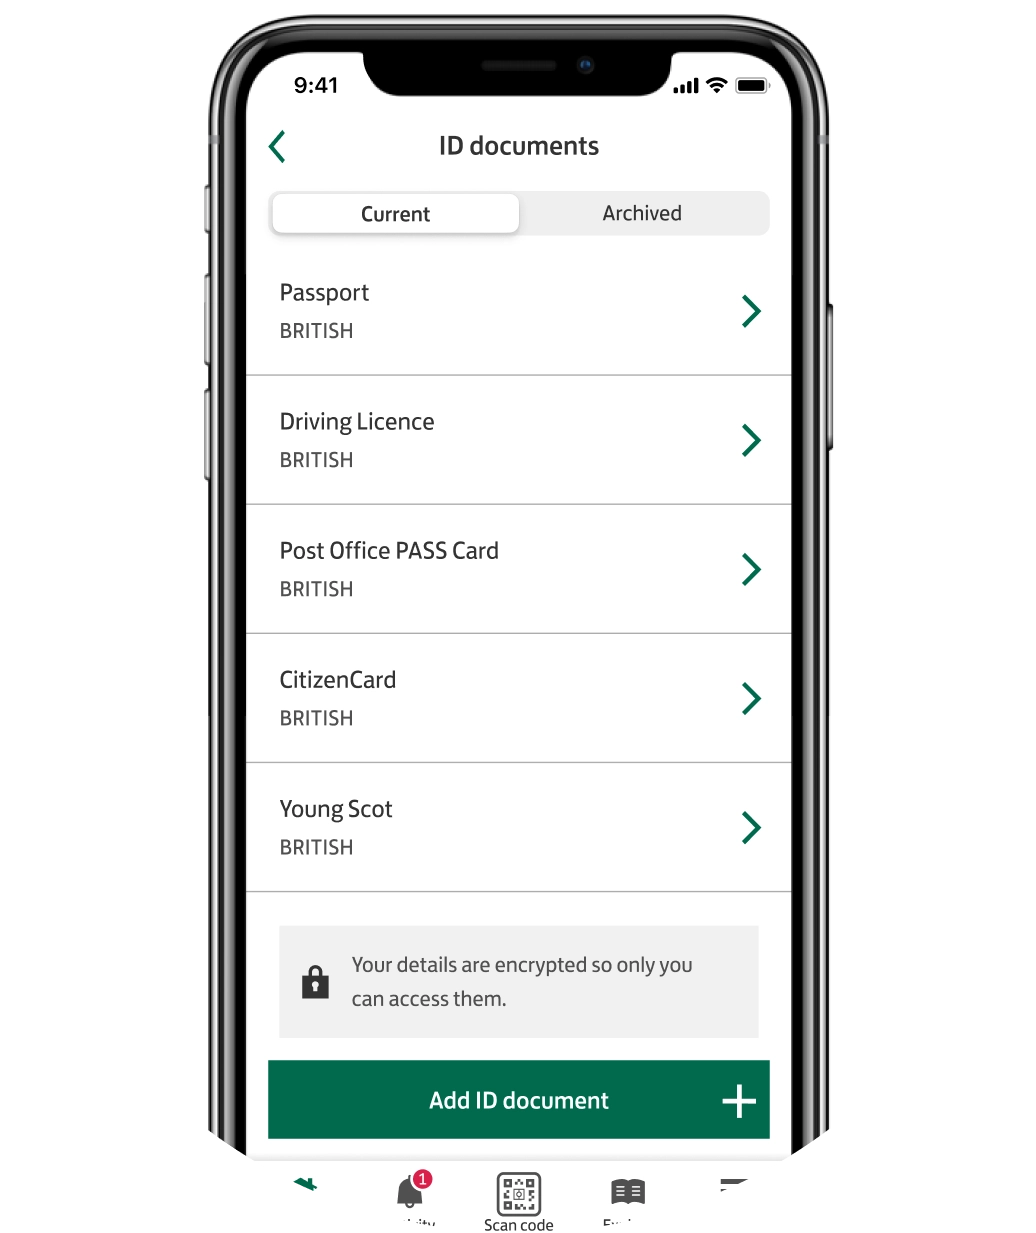 Digital ID connect apps accept passports, driving licenses, PASS Cards, CitizenCards and Young Scot